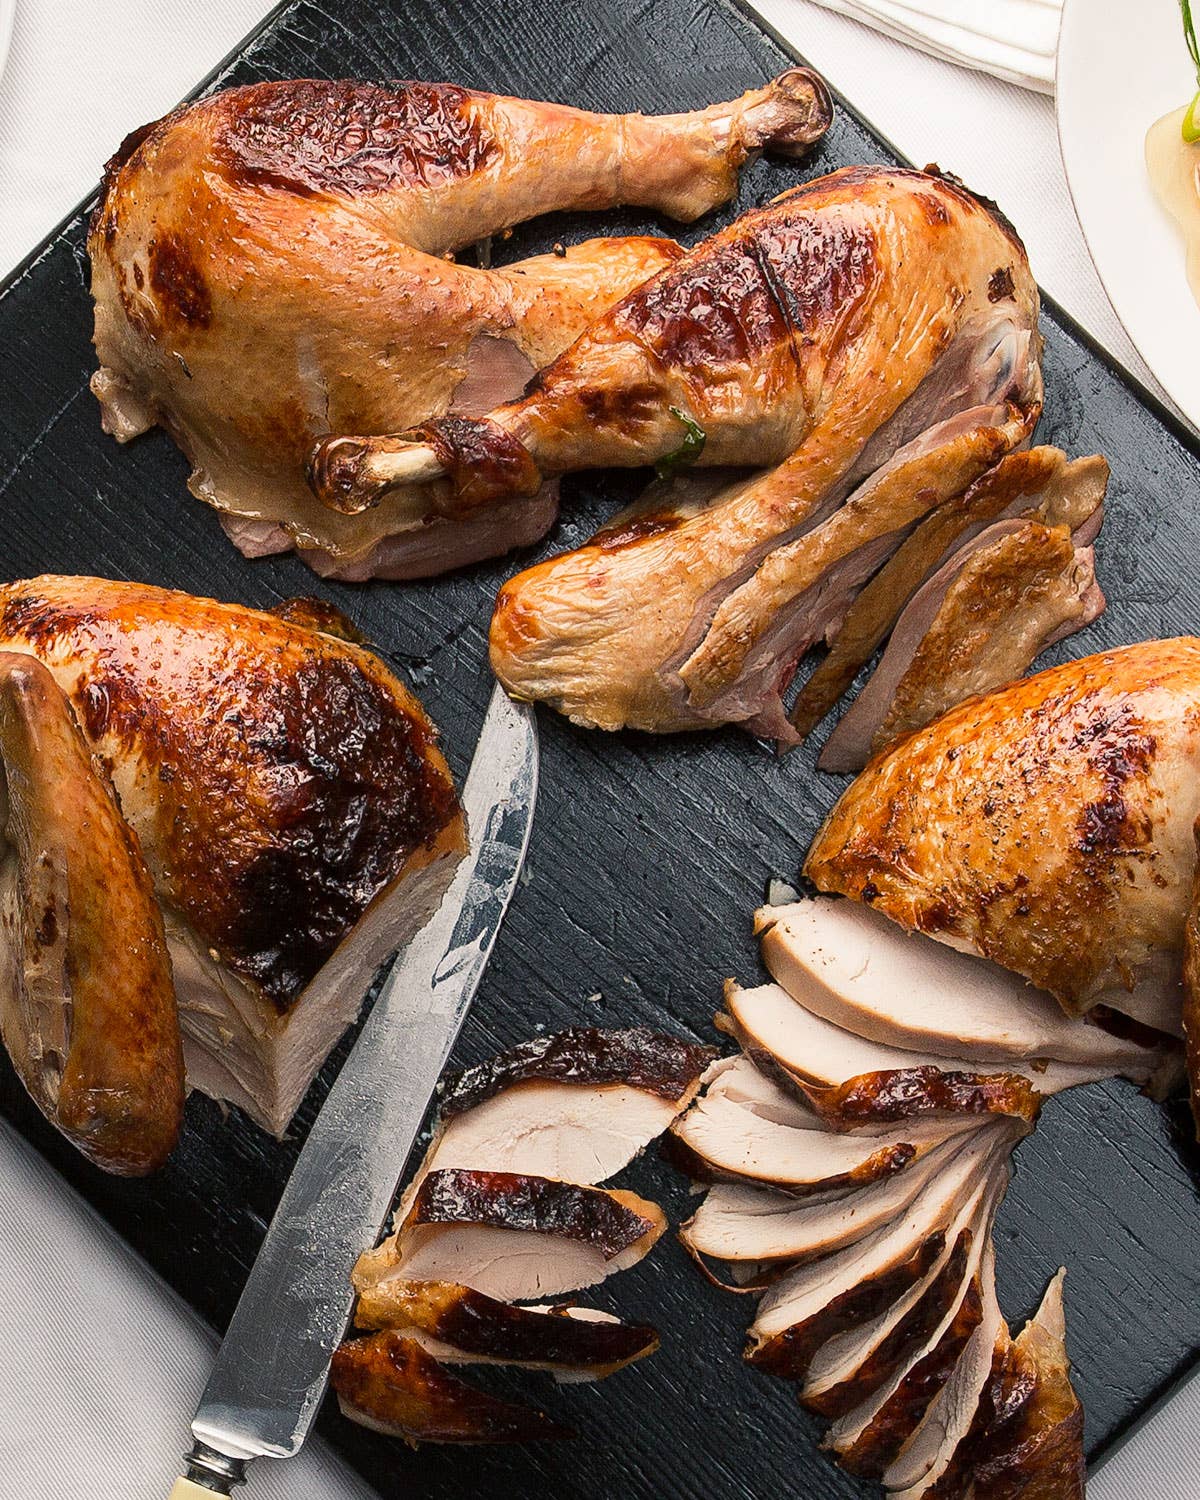 The Best Mail-Order Turkeys for Your Thanksgiving Table